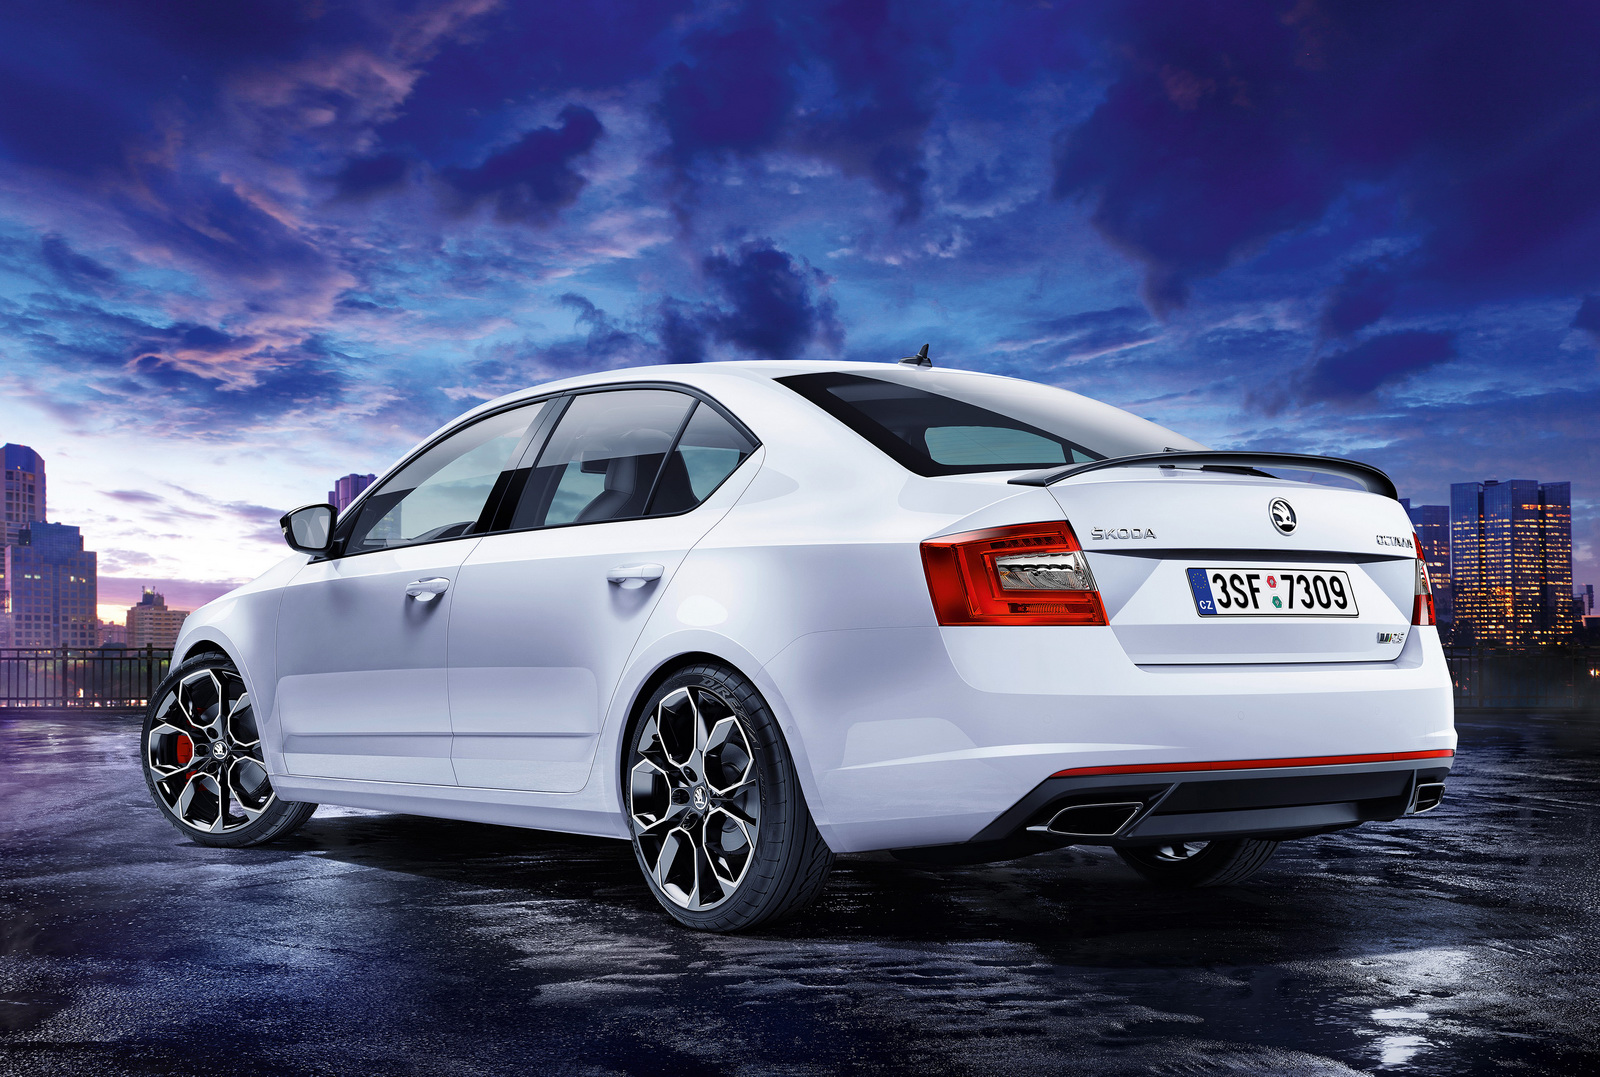 Skoda Octavia RS 230 Special Edition Brings More Power and Style